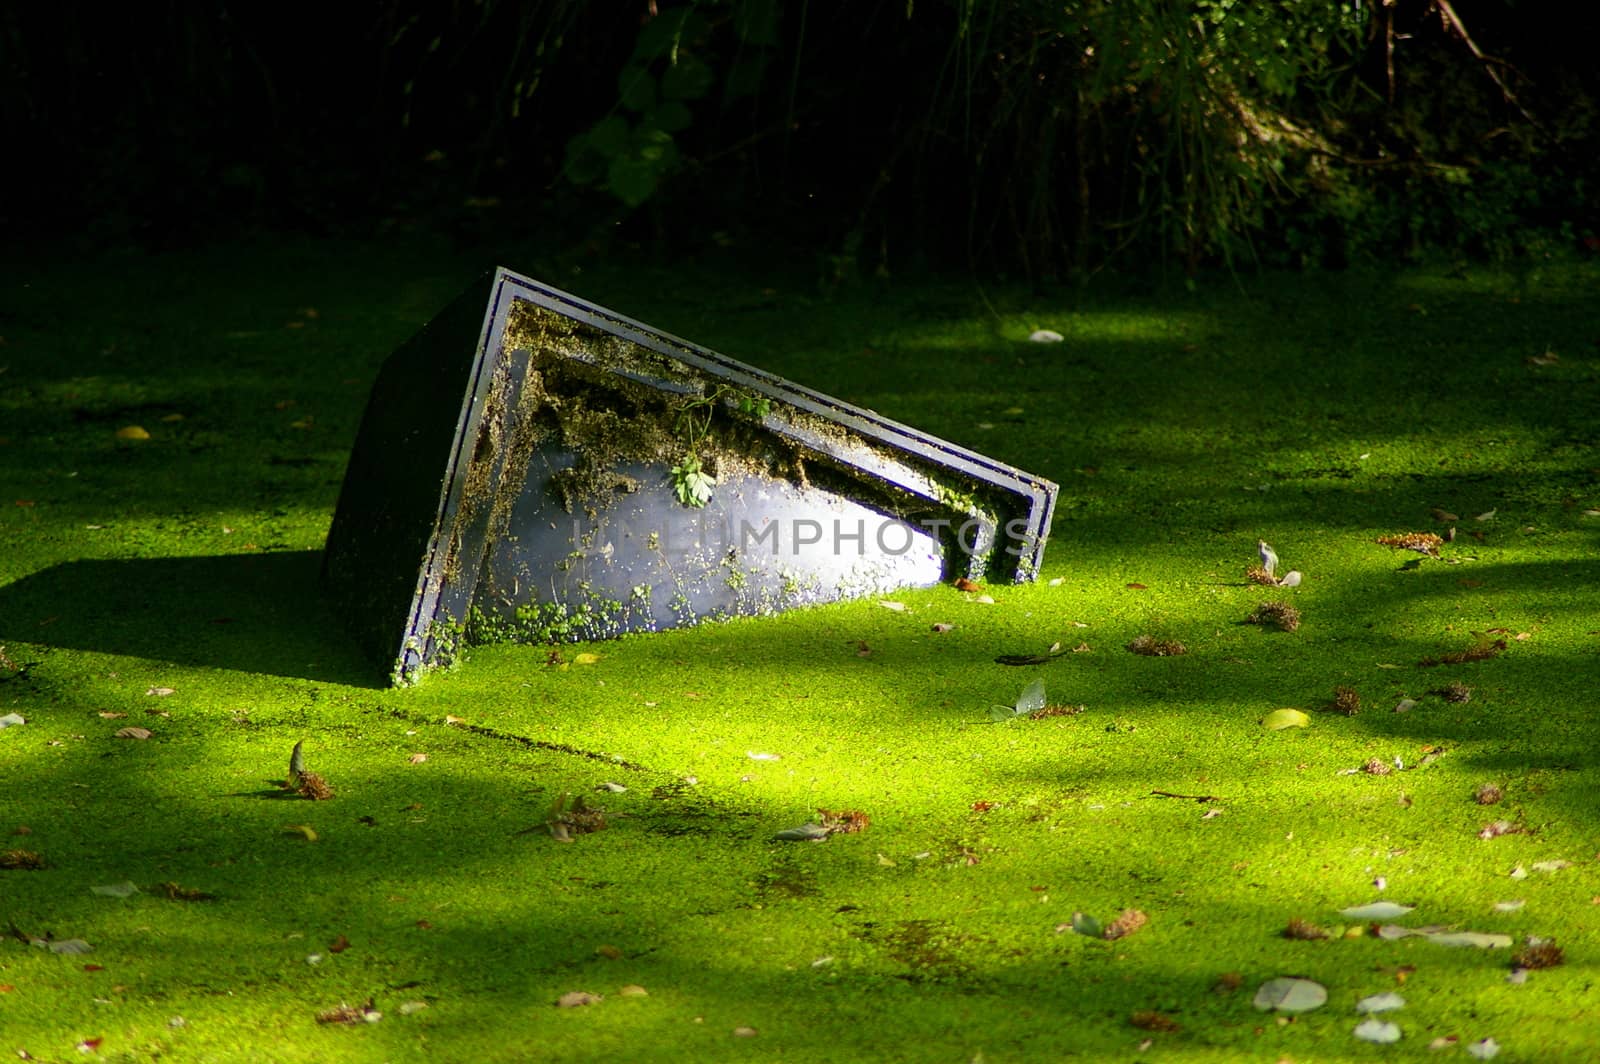 TV monitor discarded in an algae covered canal